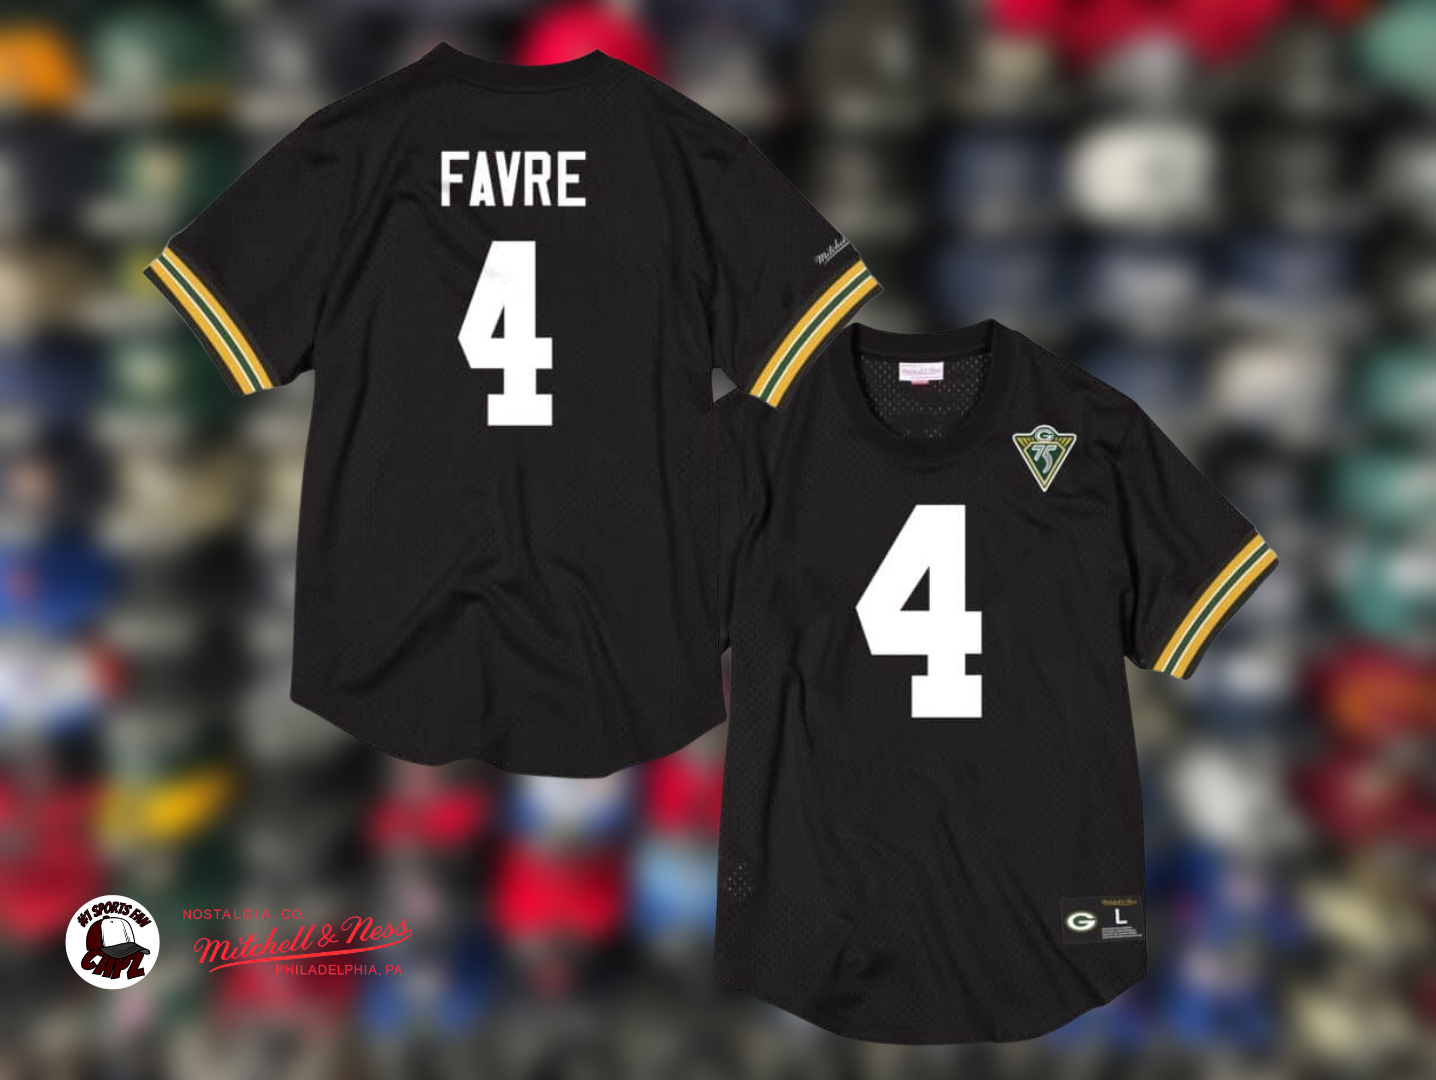 Green Bay Packers Brett Farve NFL Mitchell & Ness Throwback BP